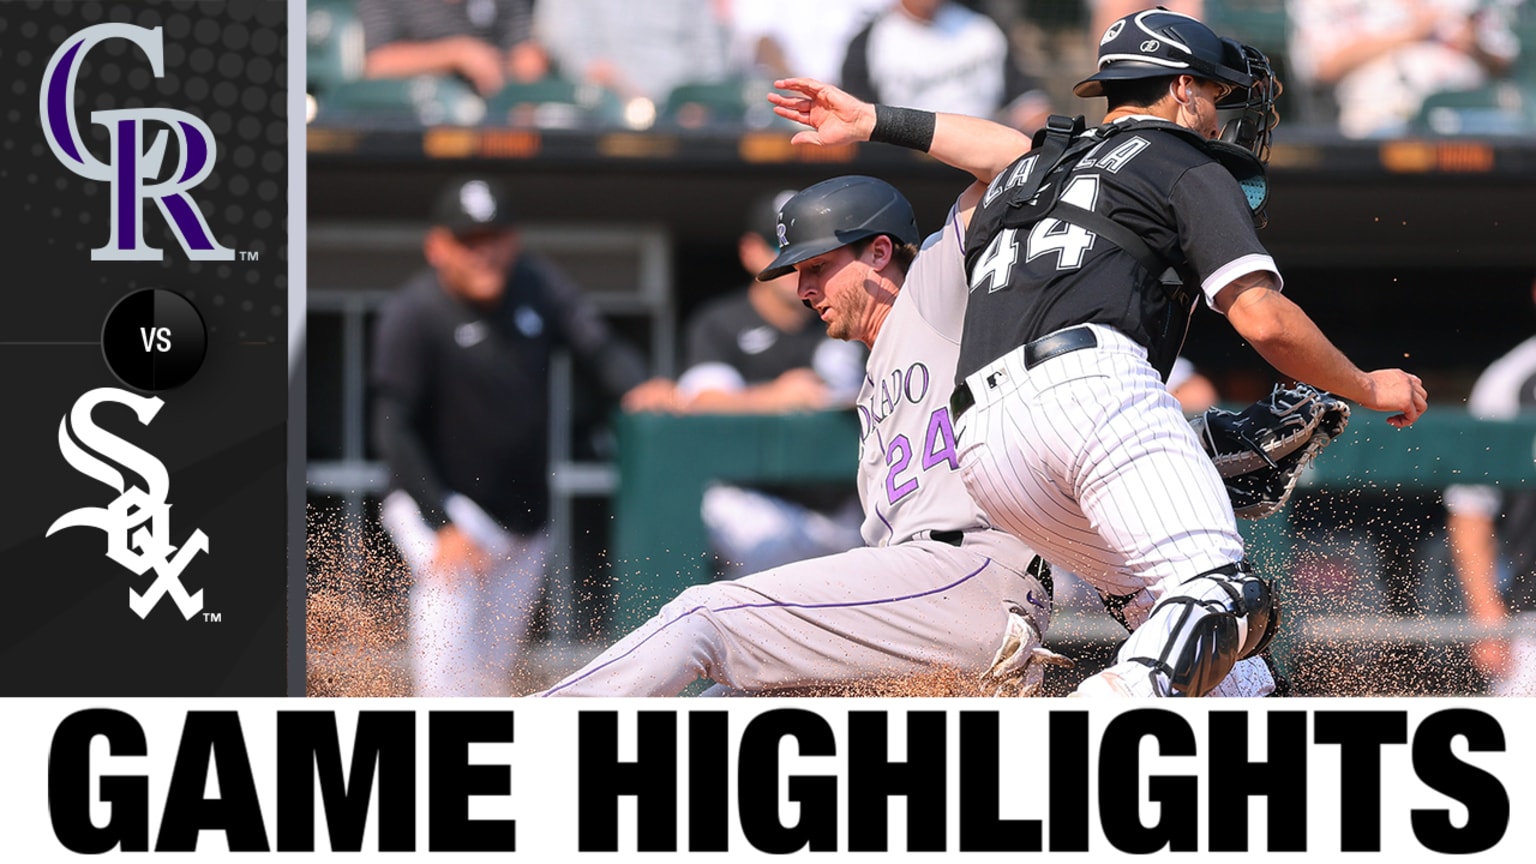 White Sox go over .500 for the first time since May with win vs Rockies